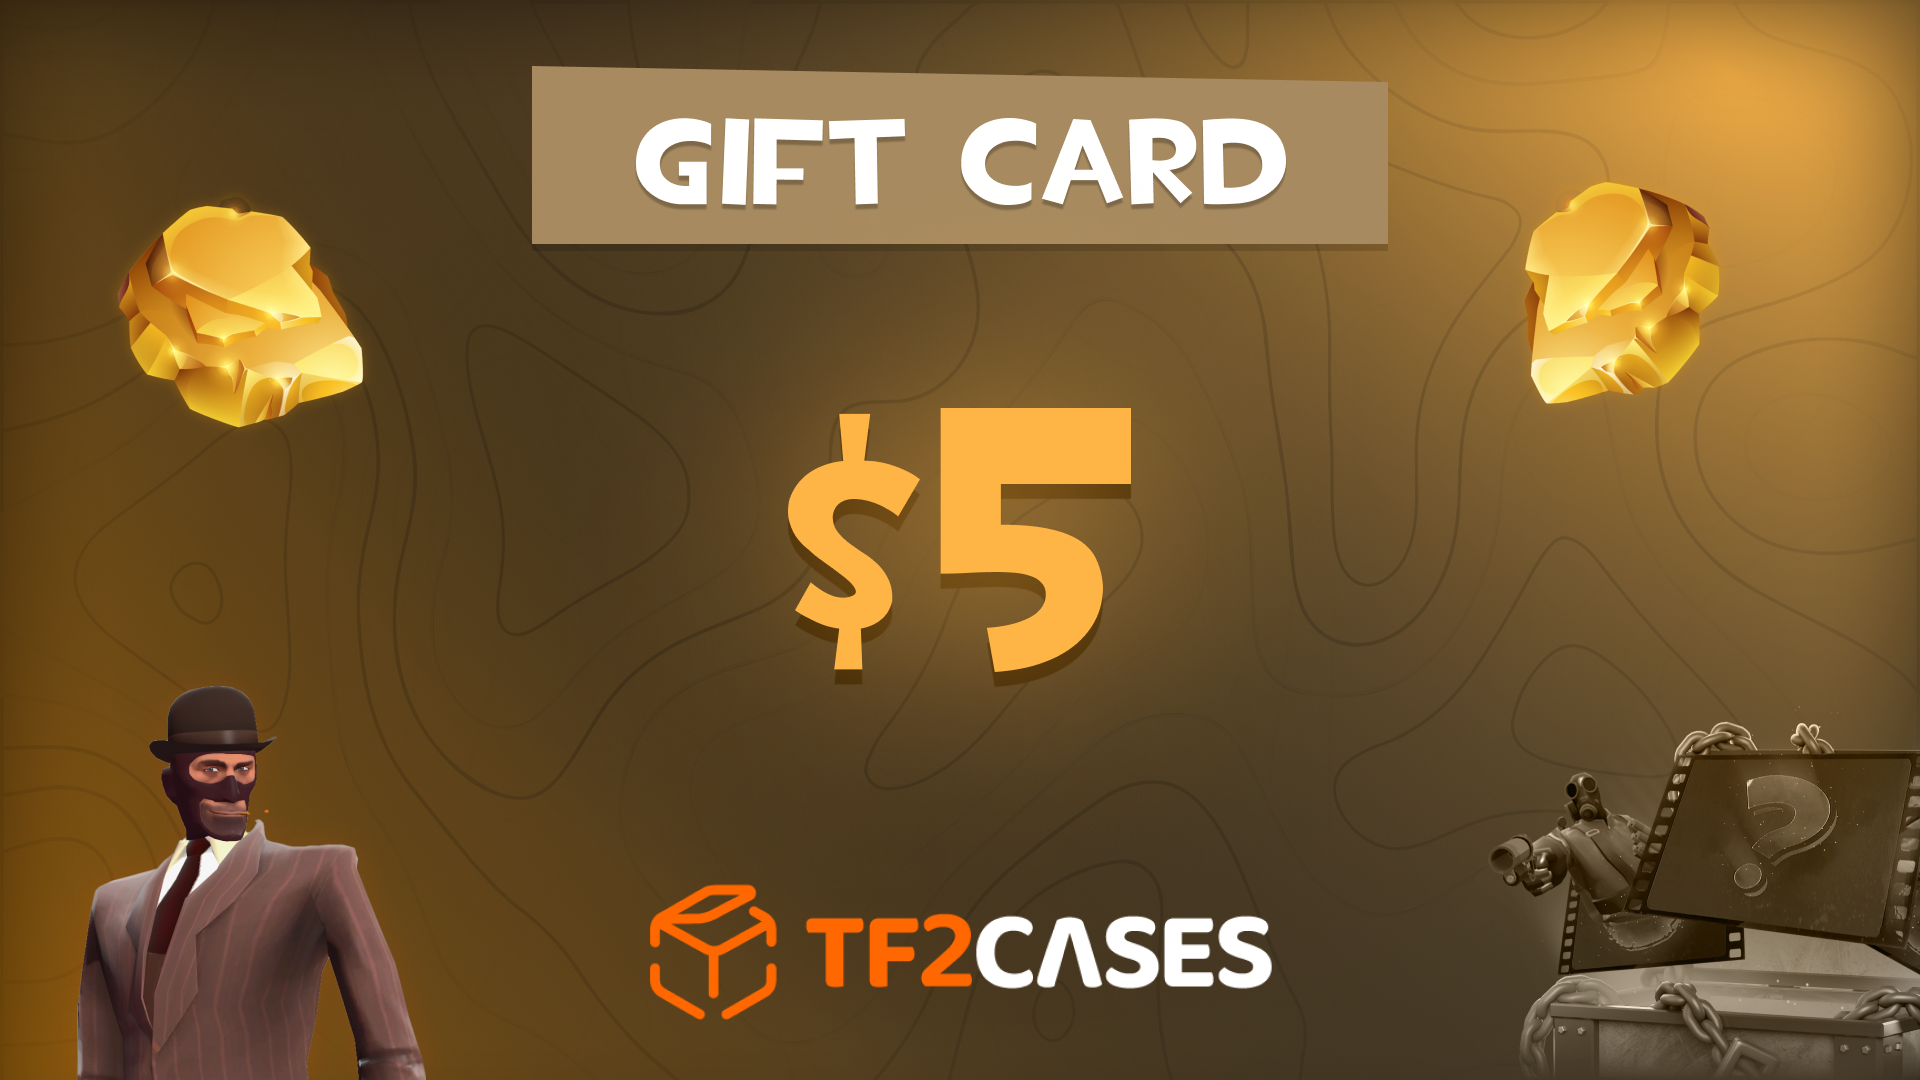 [$ 5.65] TF2CASES.com $5 Gift Card